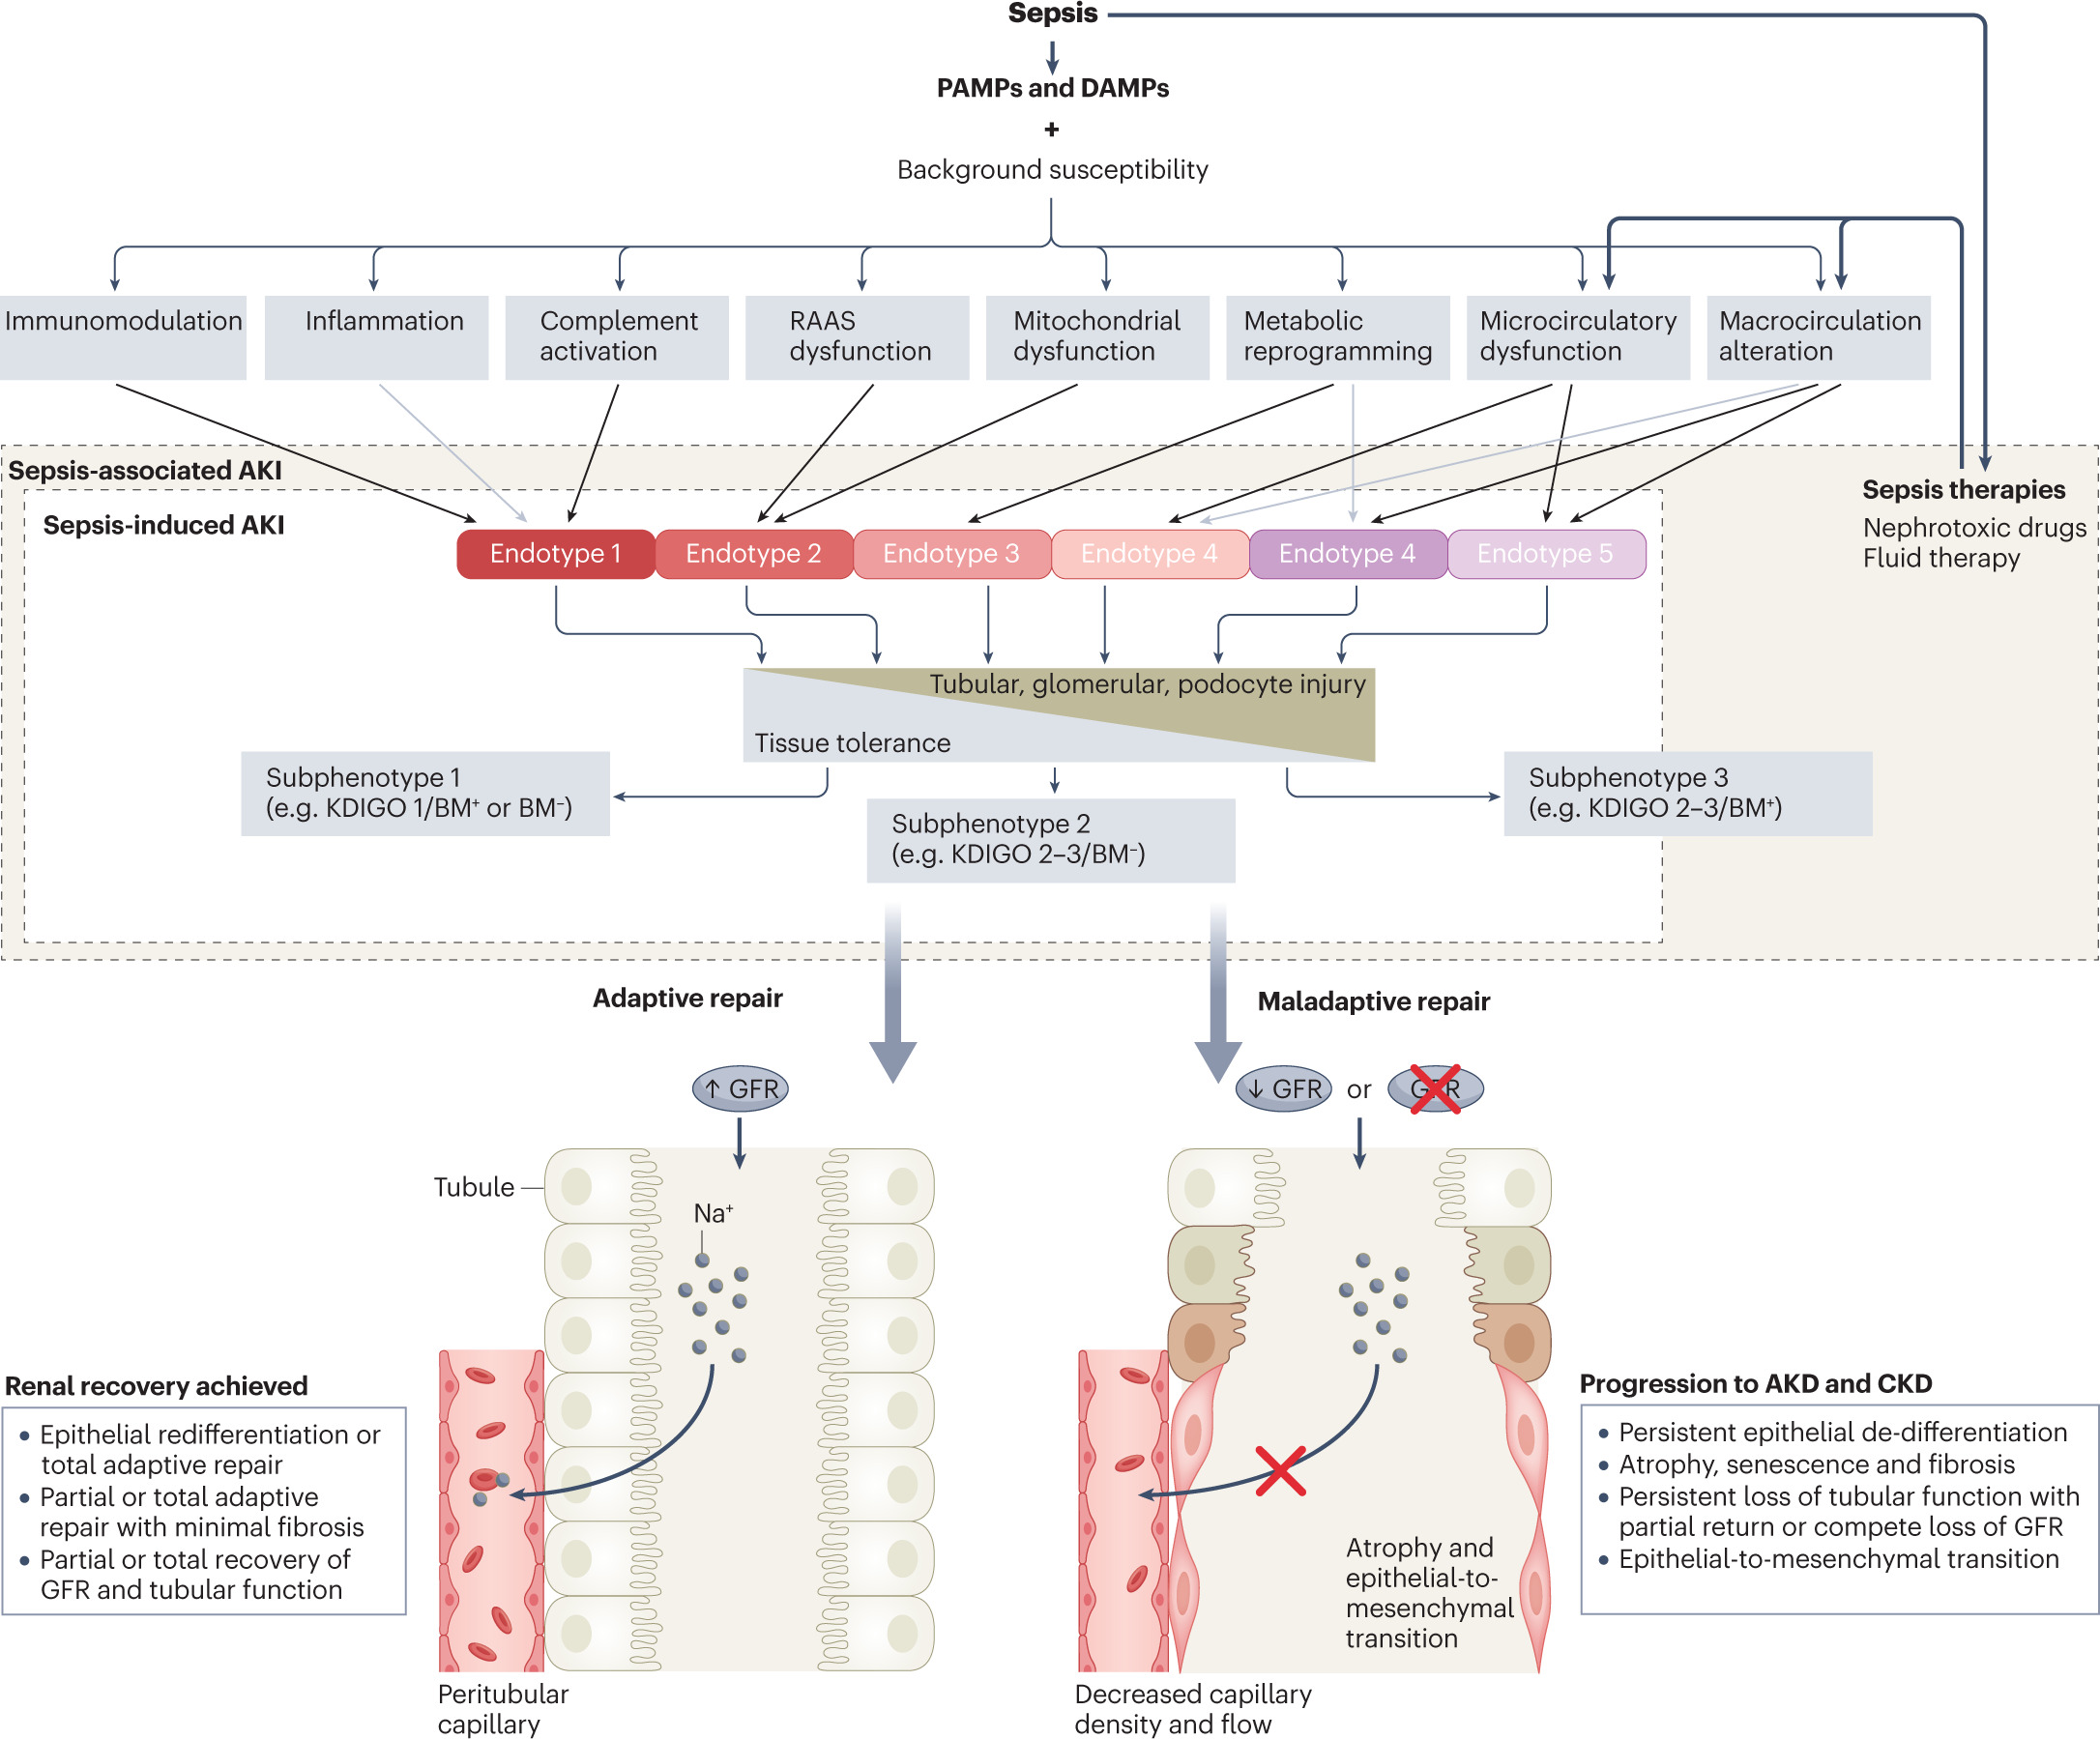 Sepsis-associated acute kidney injury: consensus report of the